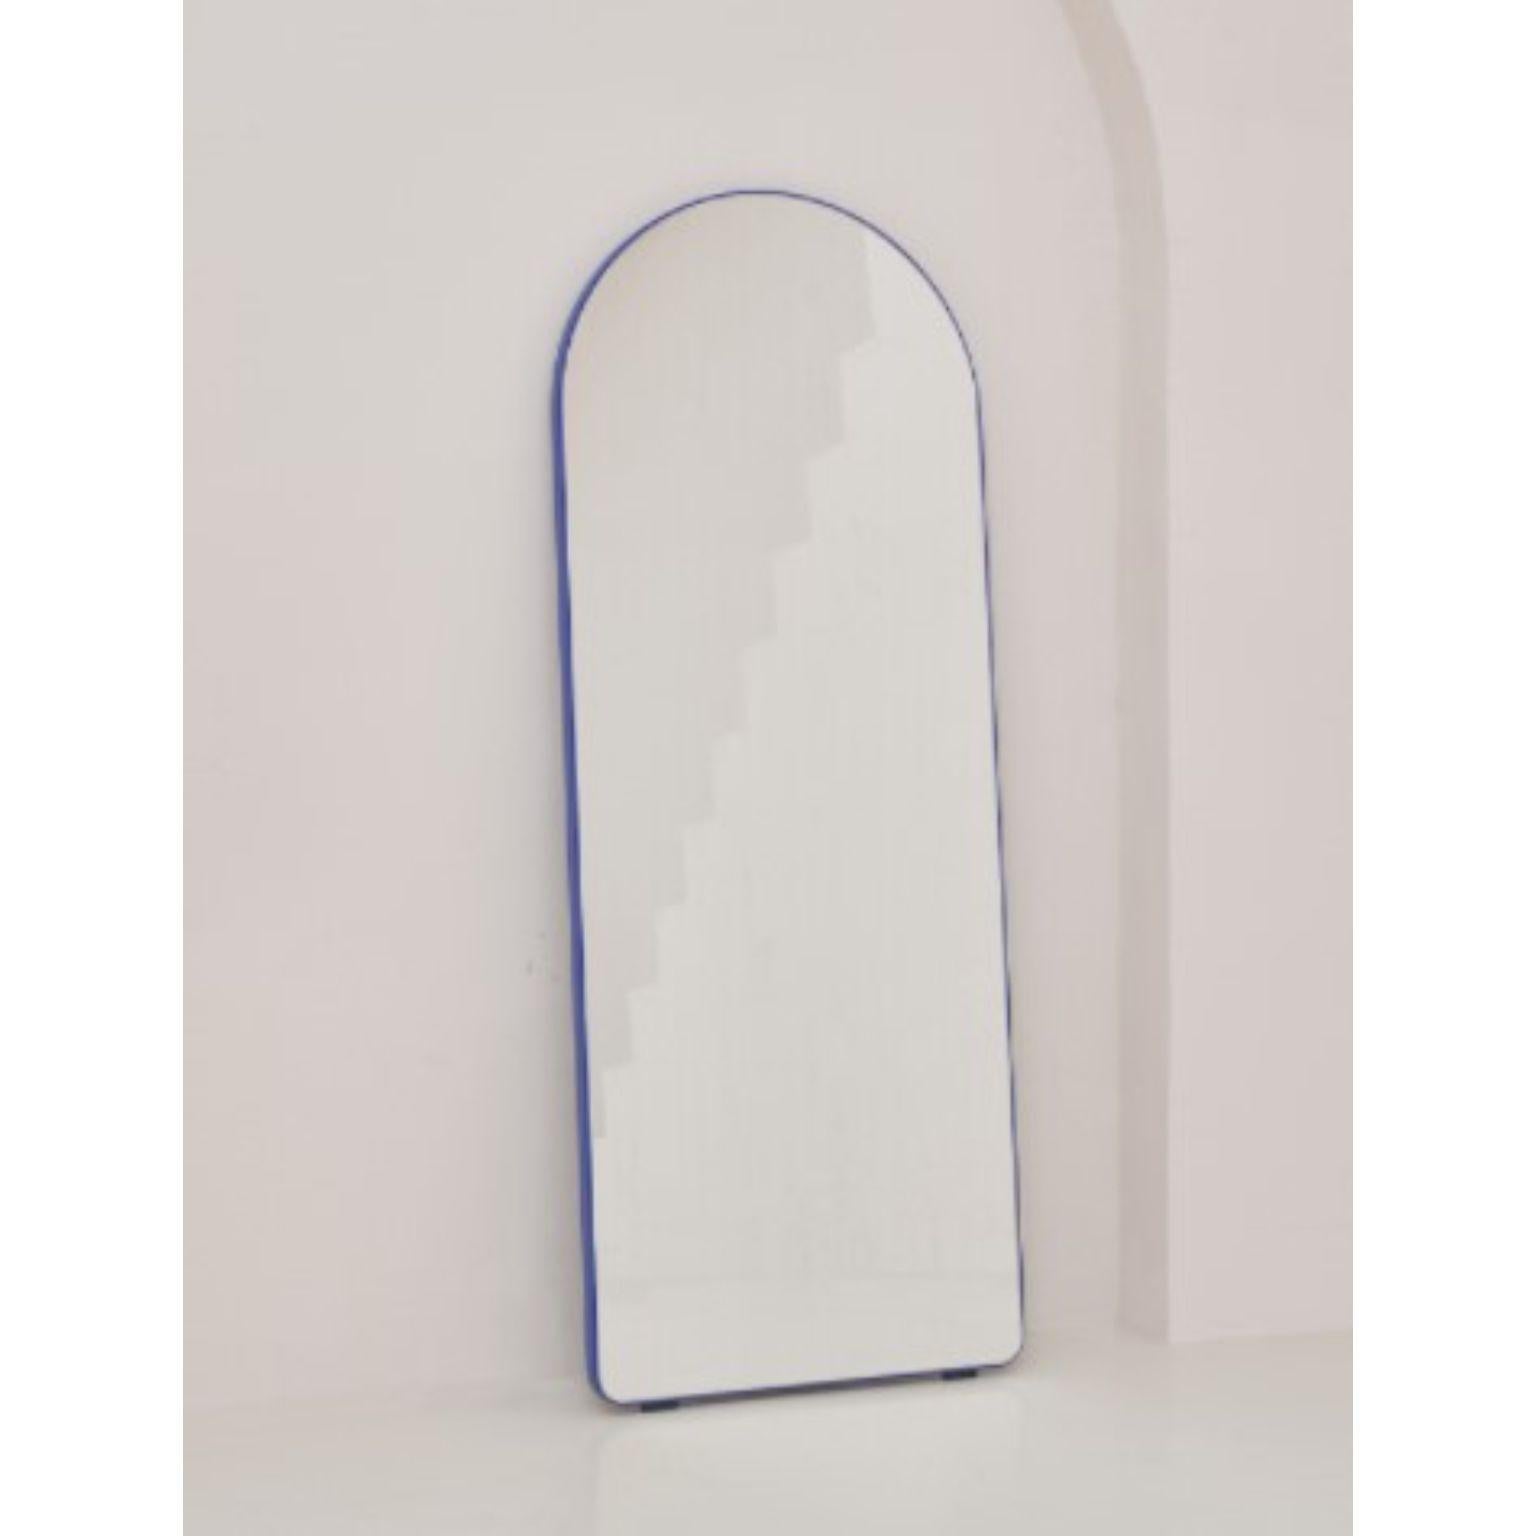 Loveself 01 mirror by Oito
Dimensions: D 70 x W 4 x H 180 cm
Materials:Peinting mdf, Silver glass mirror

LOVESELF is a collection of mirrors created by our team of designers oito design. The mission of our collection is to call everyone to love